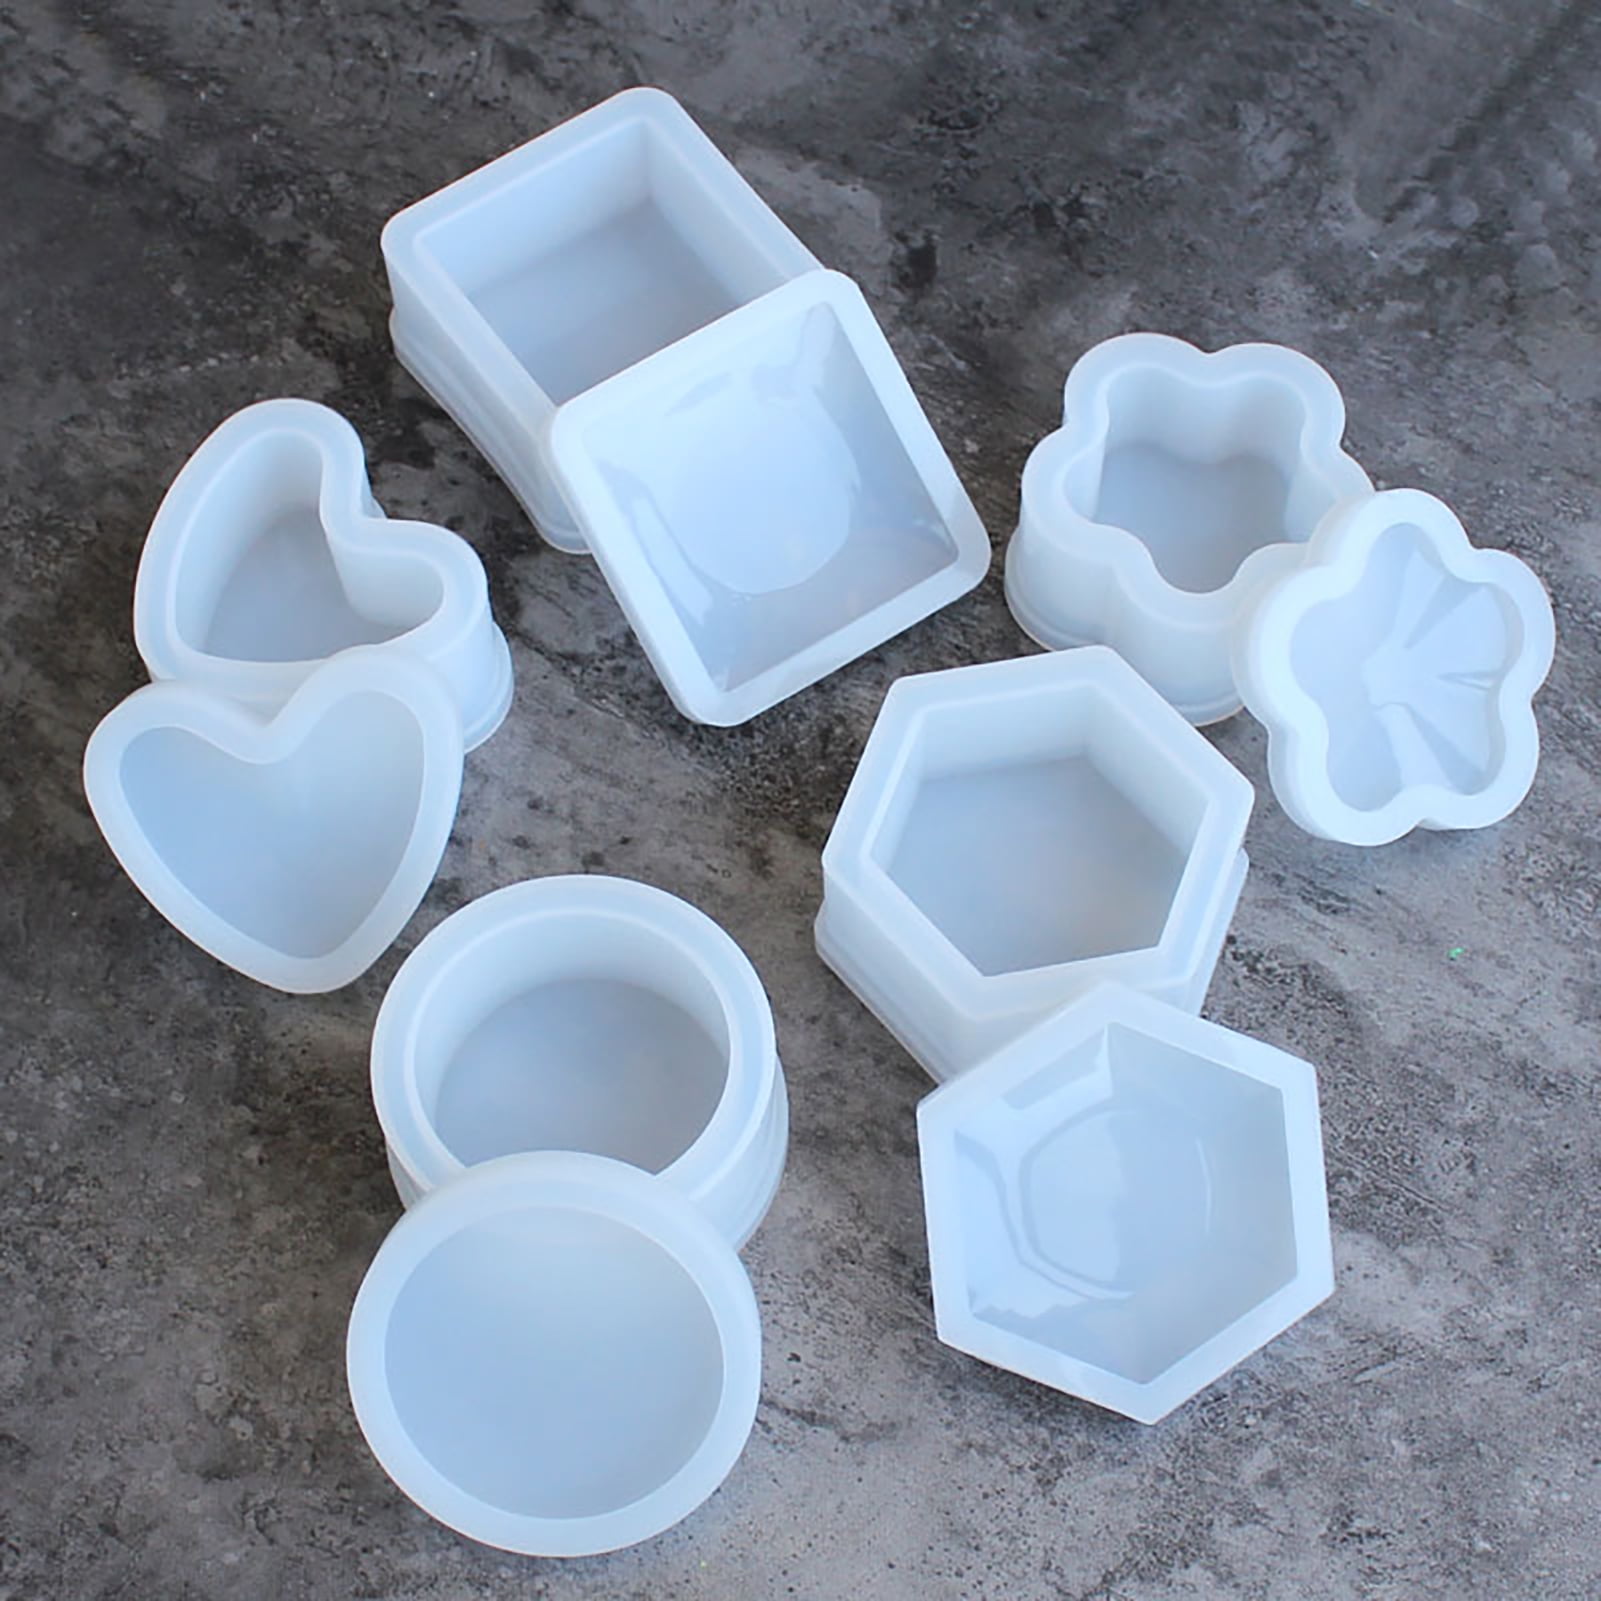 Round Hexagonal Dish Resin Molds Silicone Jewelry Tray Molds Soap